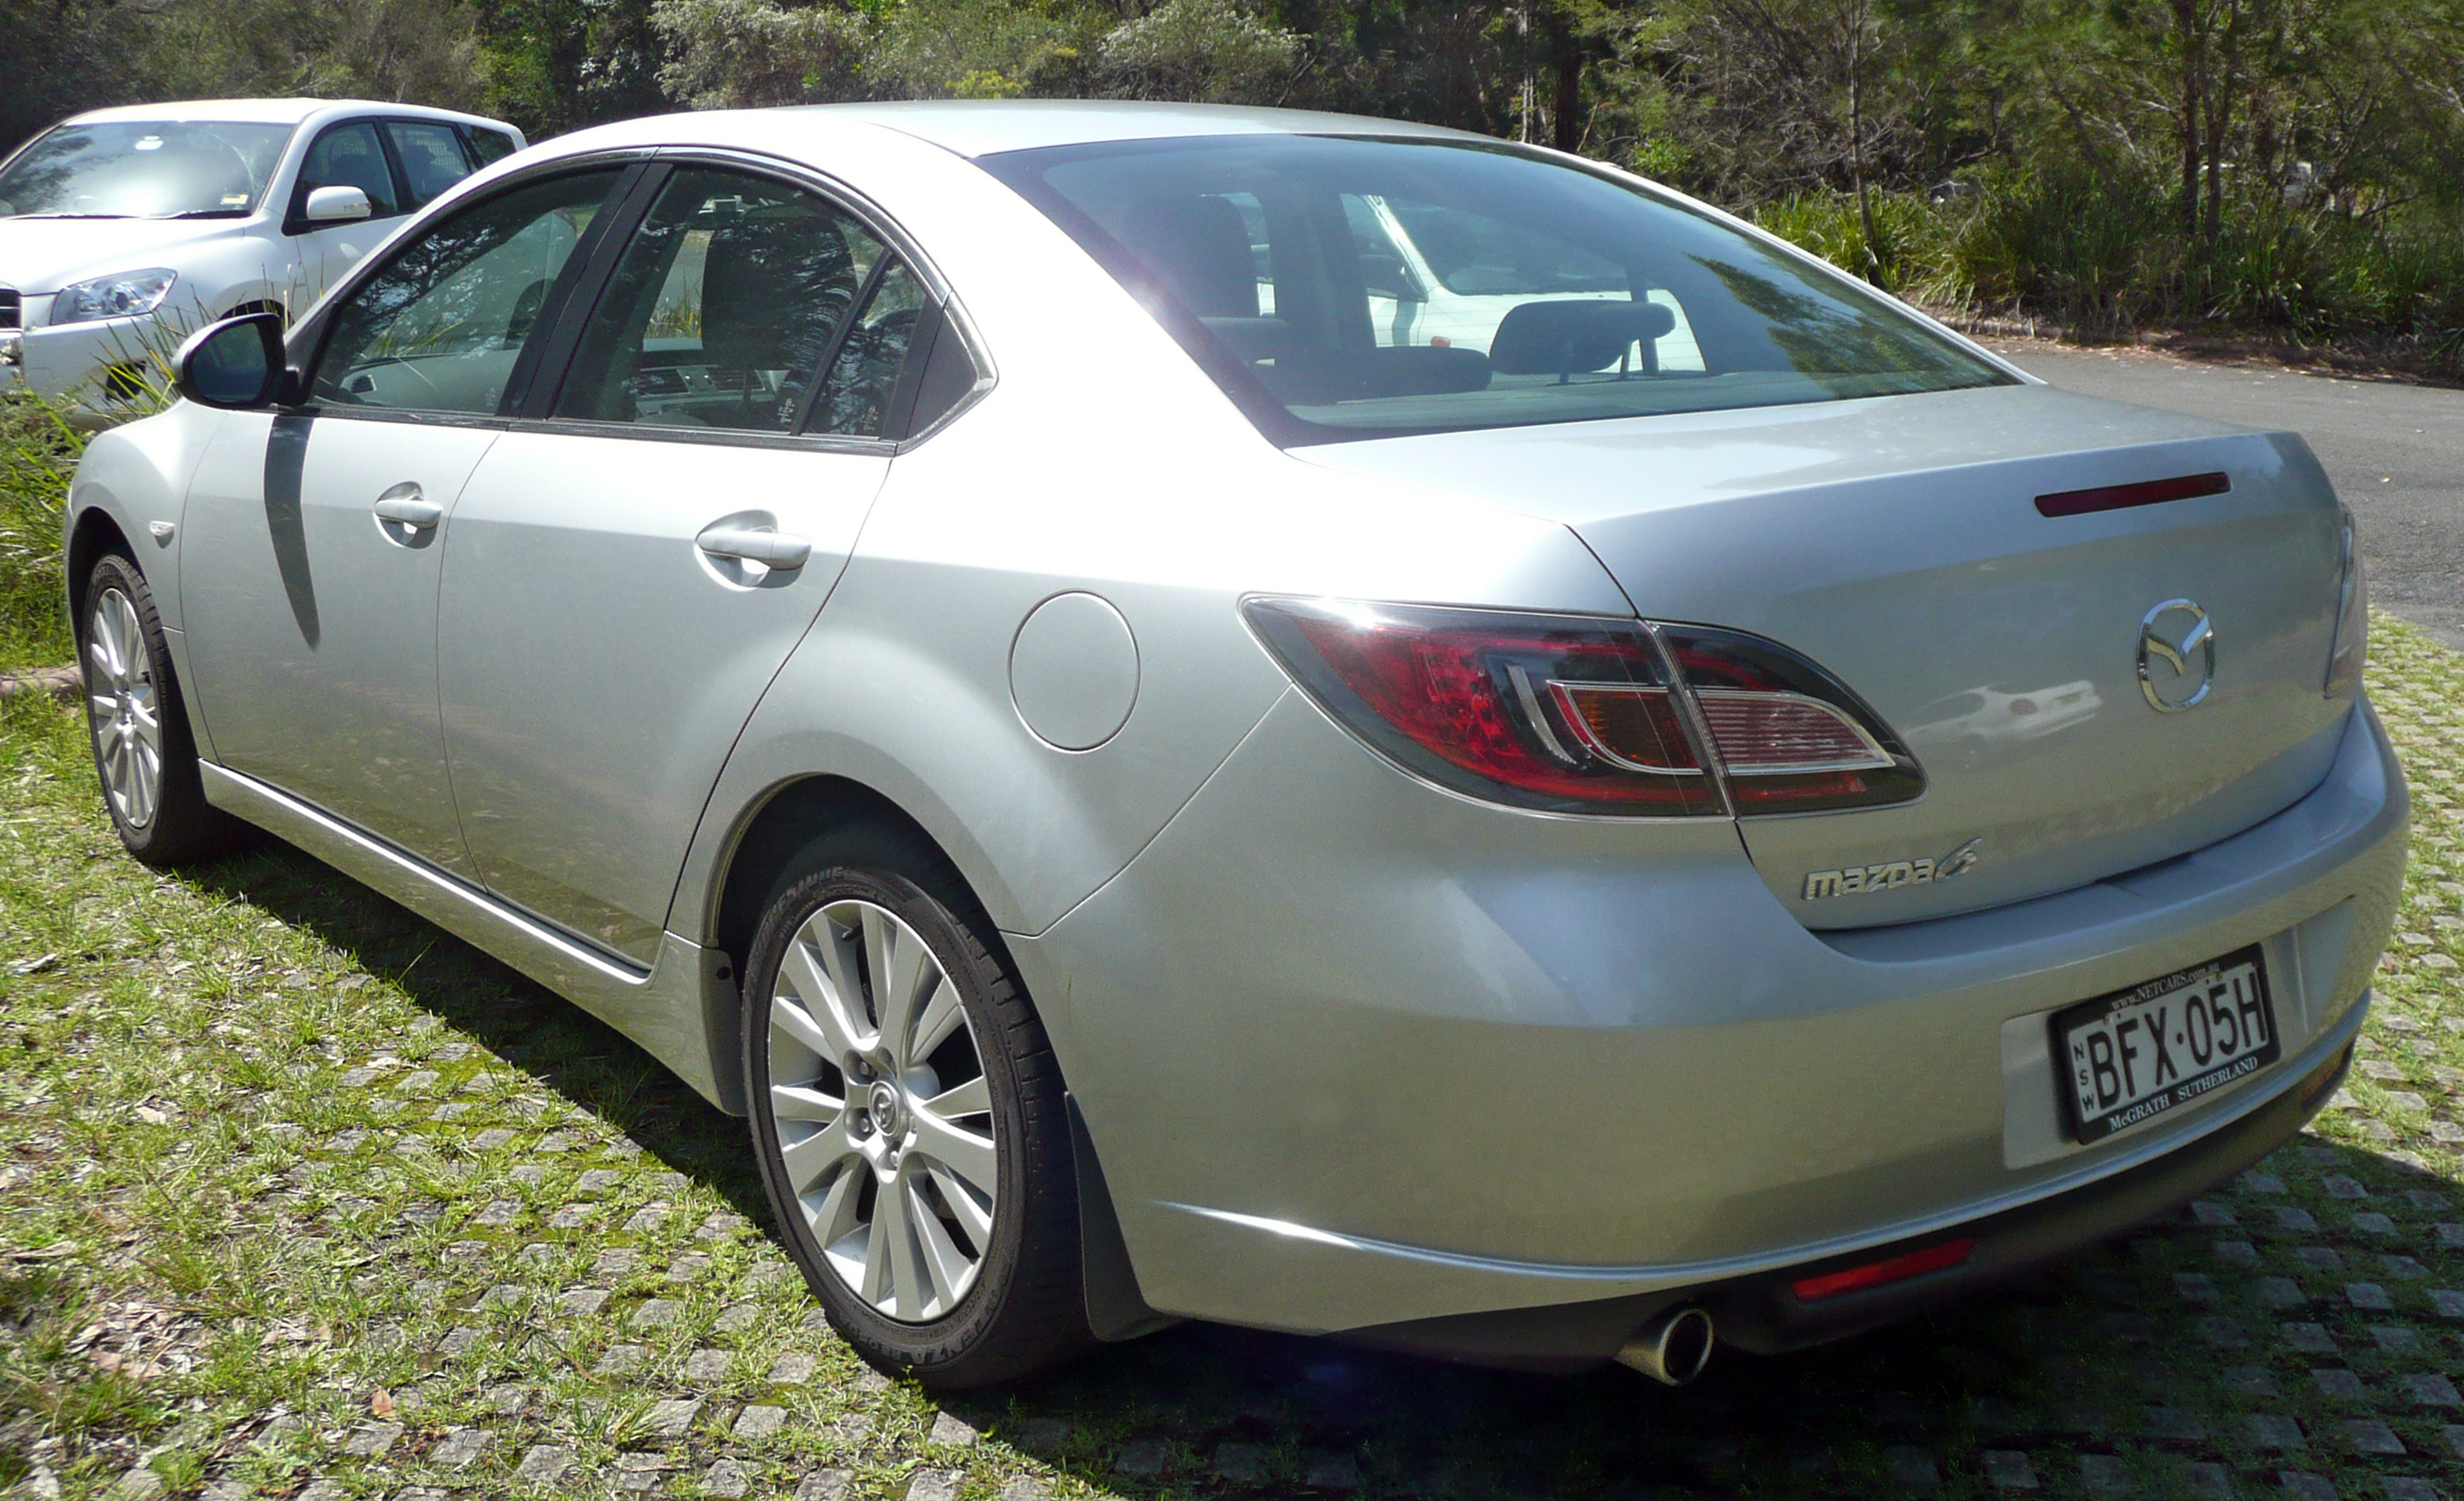 Mazda 6 2009: Review, Amazing Pictures and Images - Look at the car